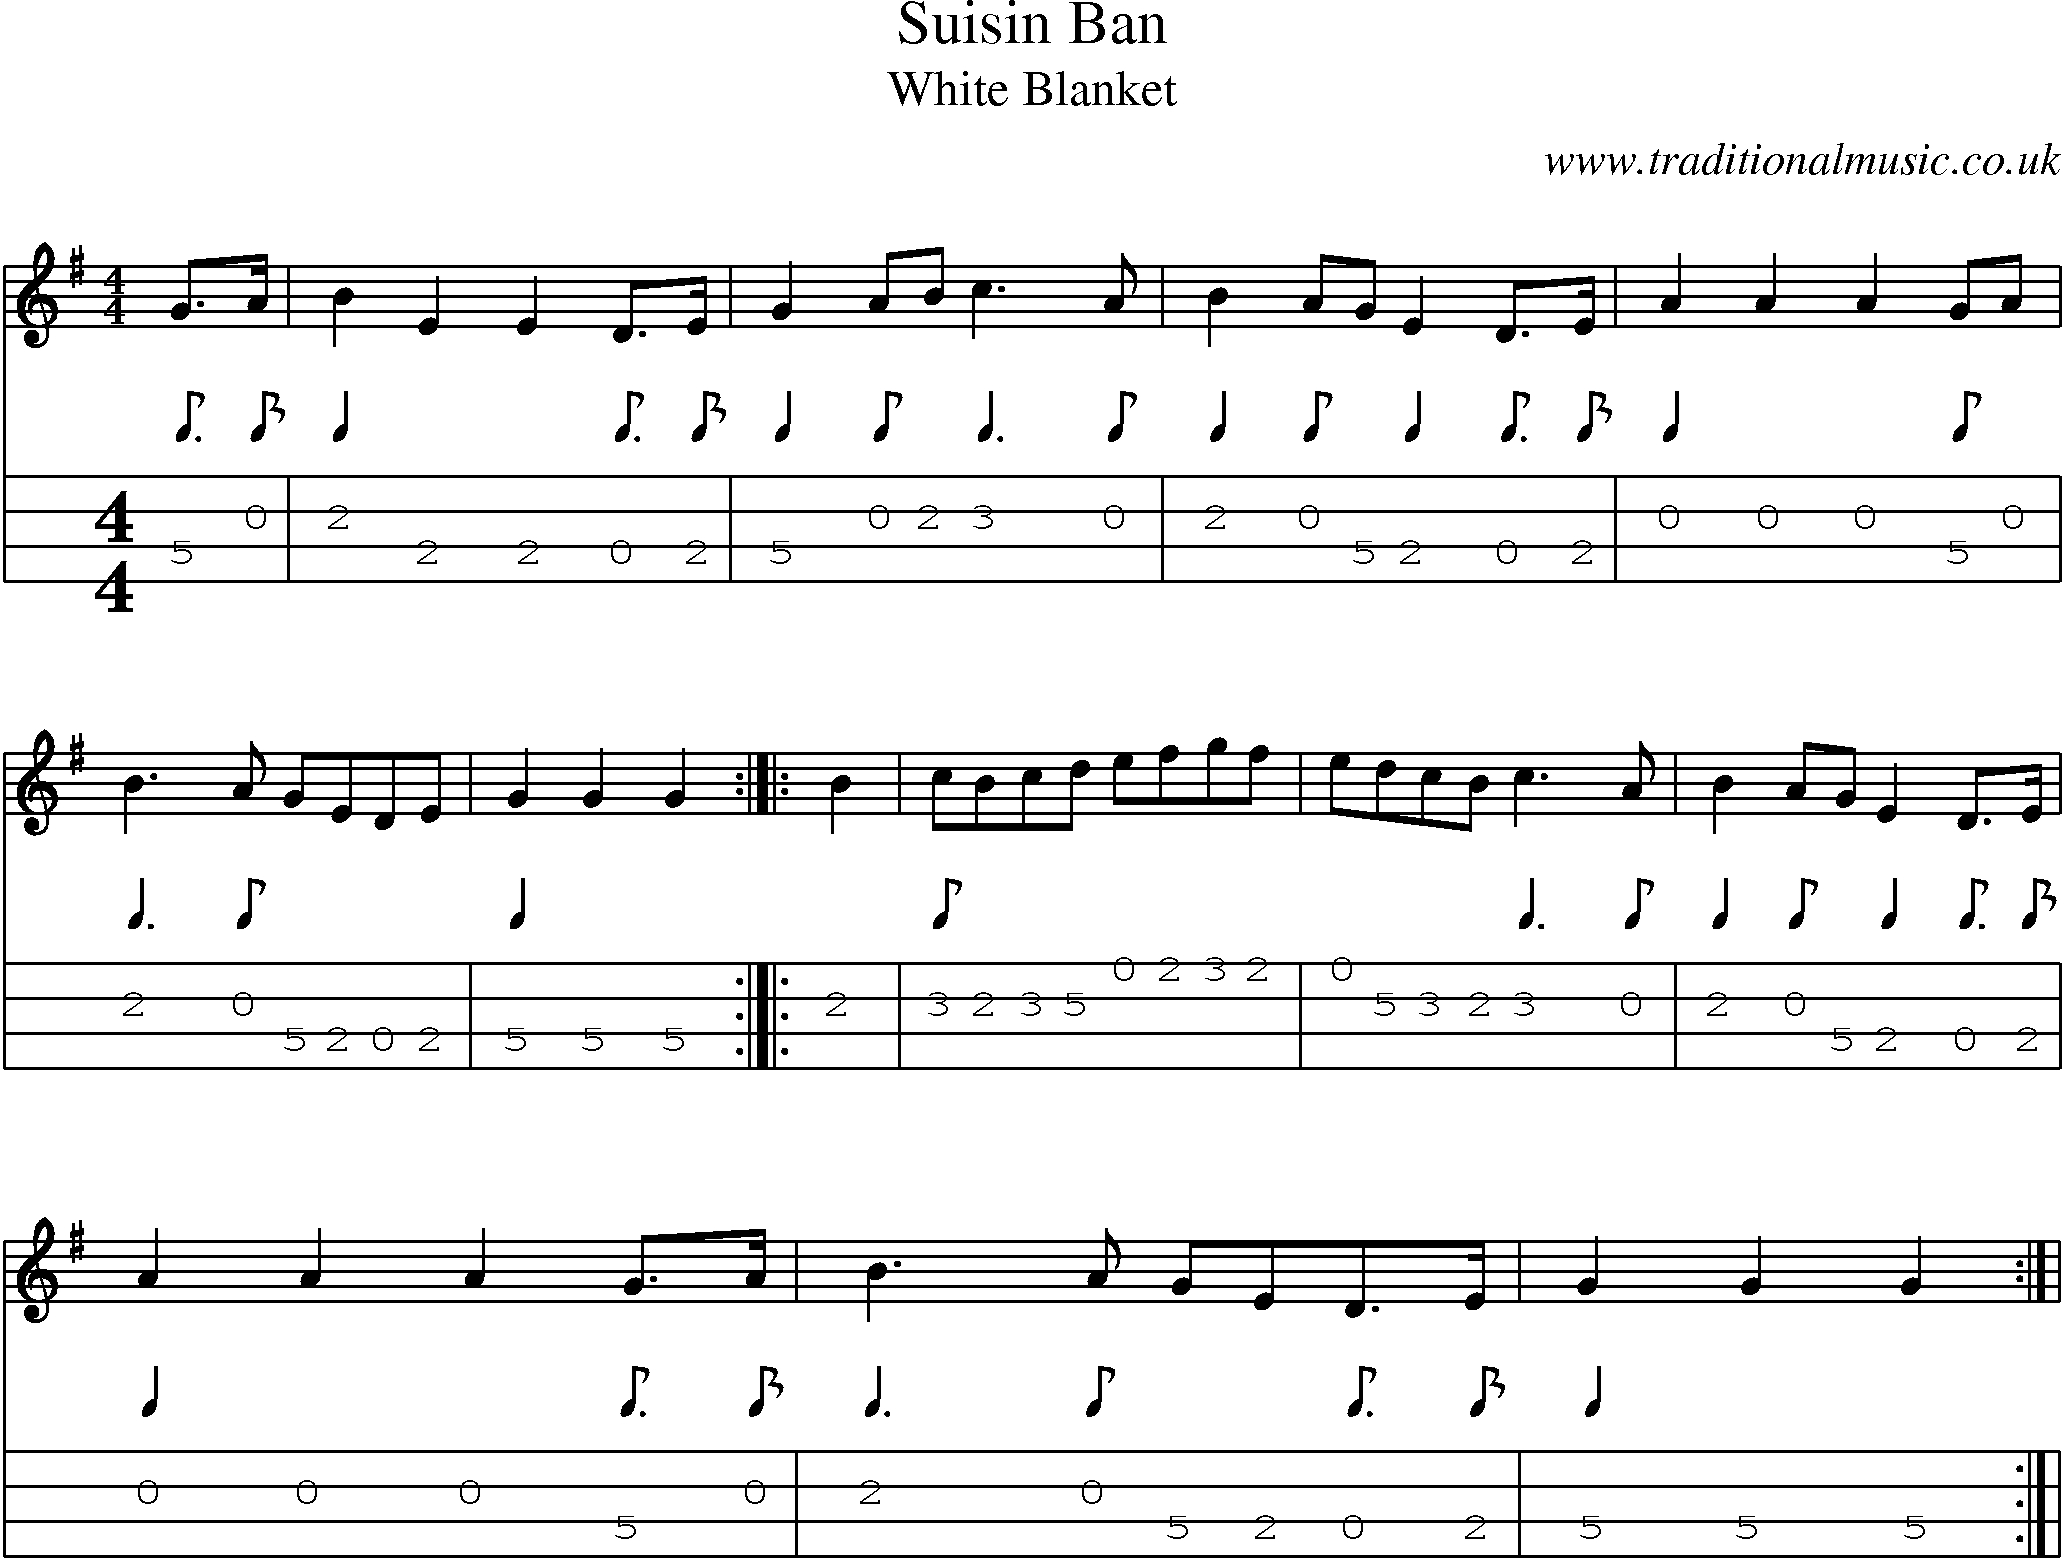 Music Score and Mandolin Tabs for Suisin Ban